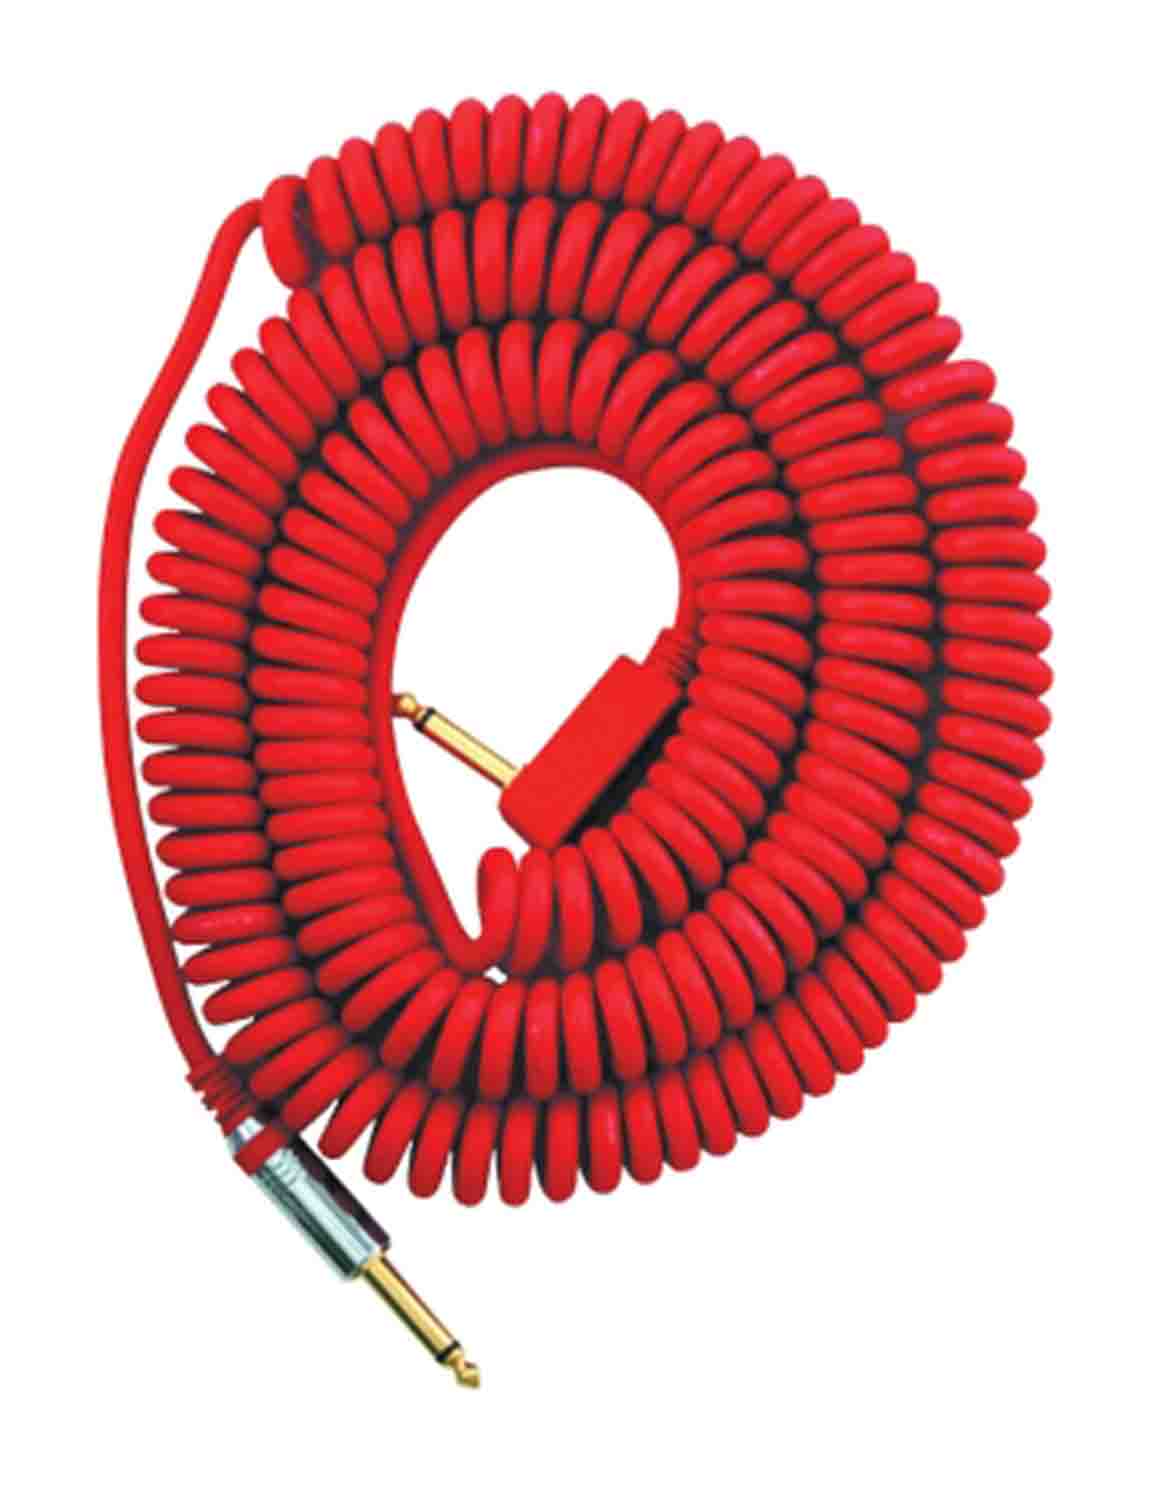 Korg Vintage Coiled Guitar Cable High-Quality 29.5' Cable with Mesh Bag - Red by Korg